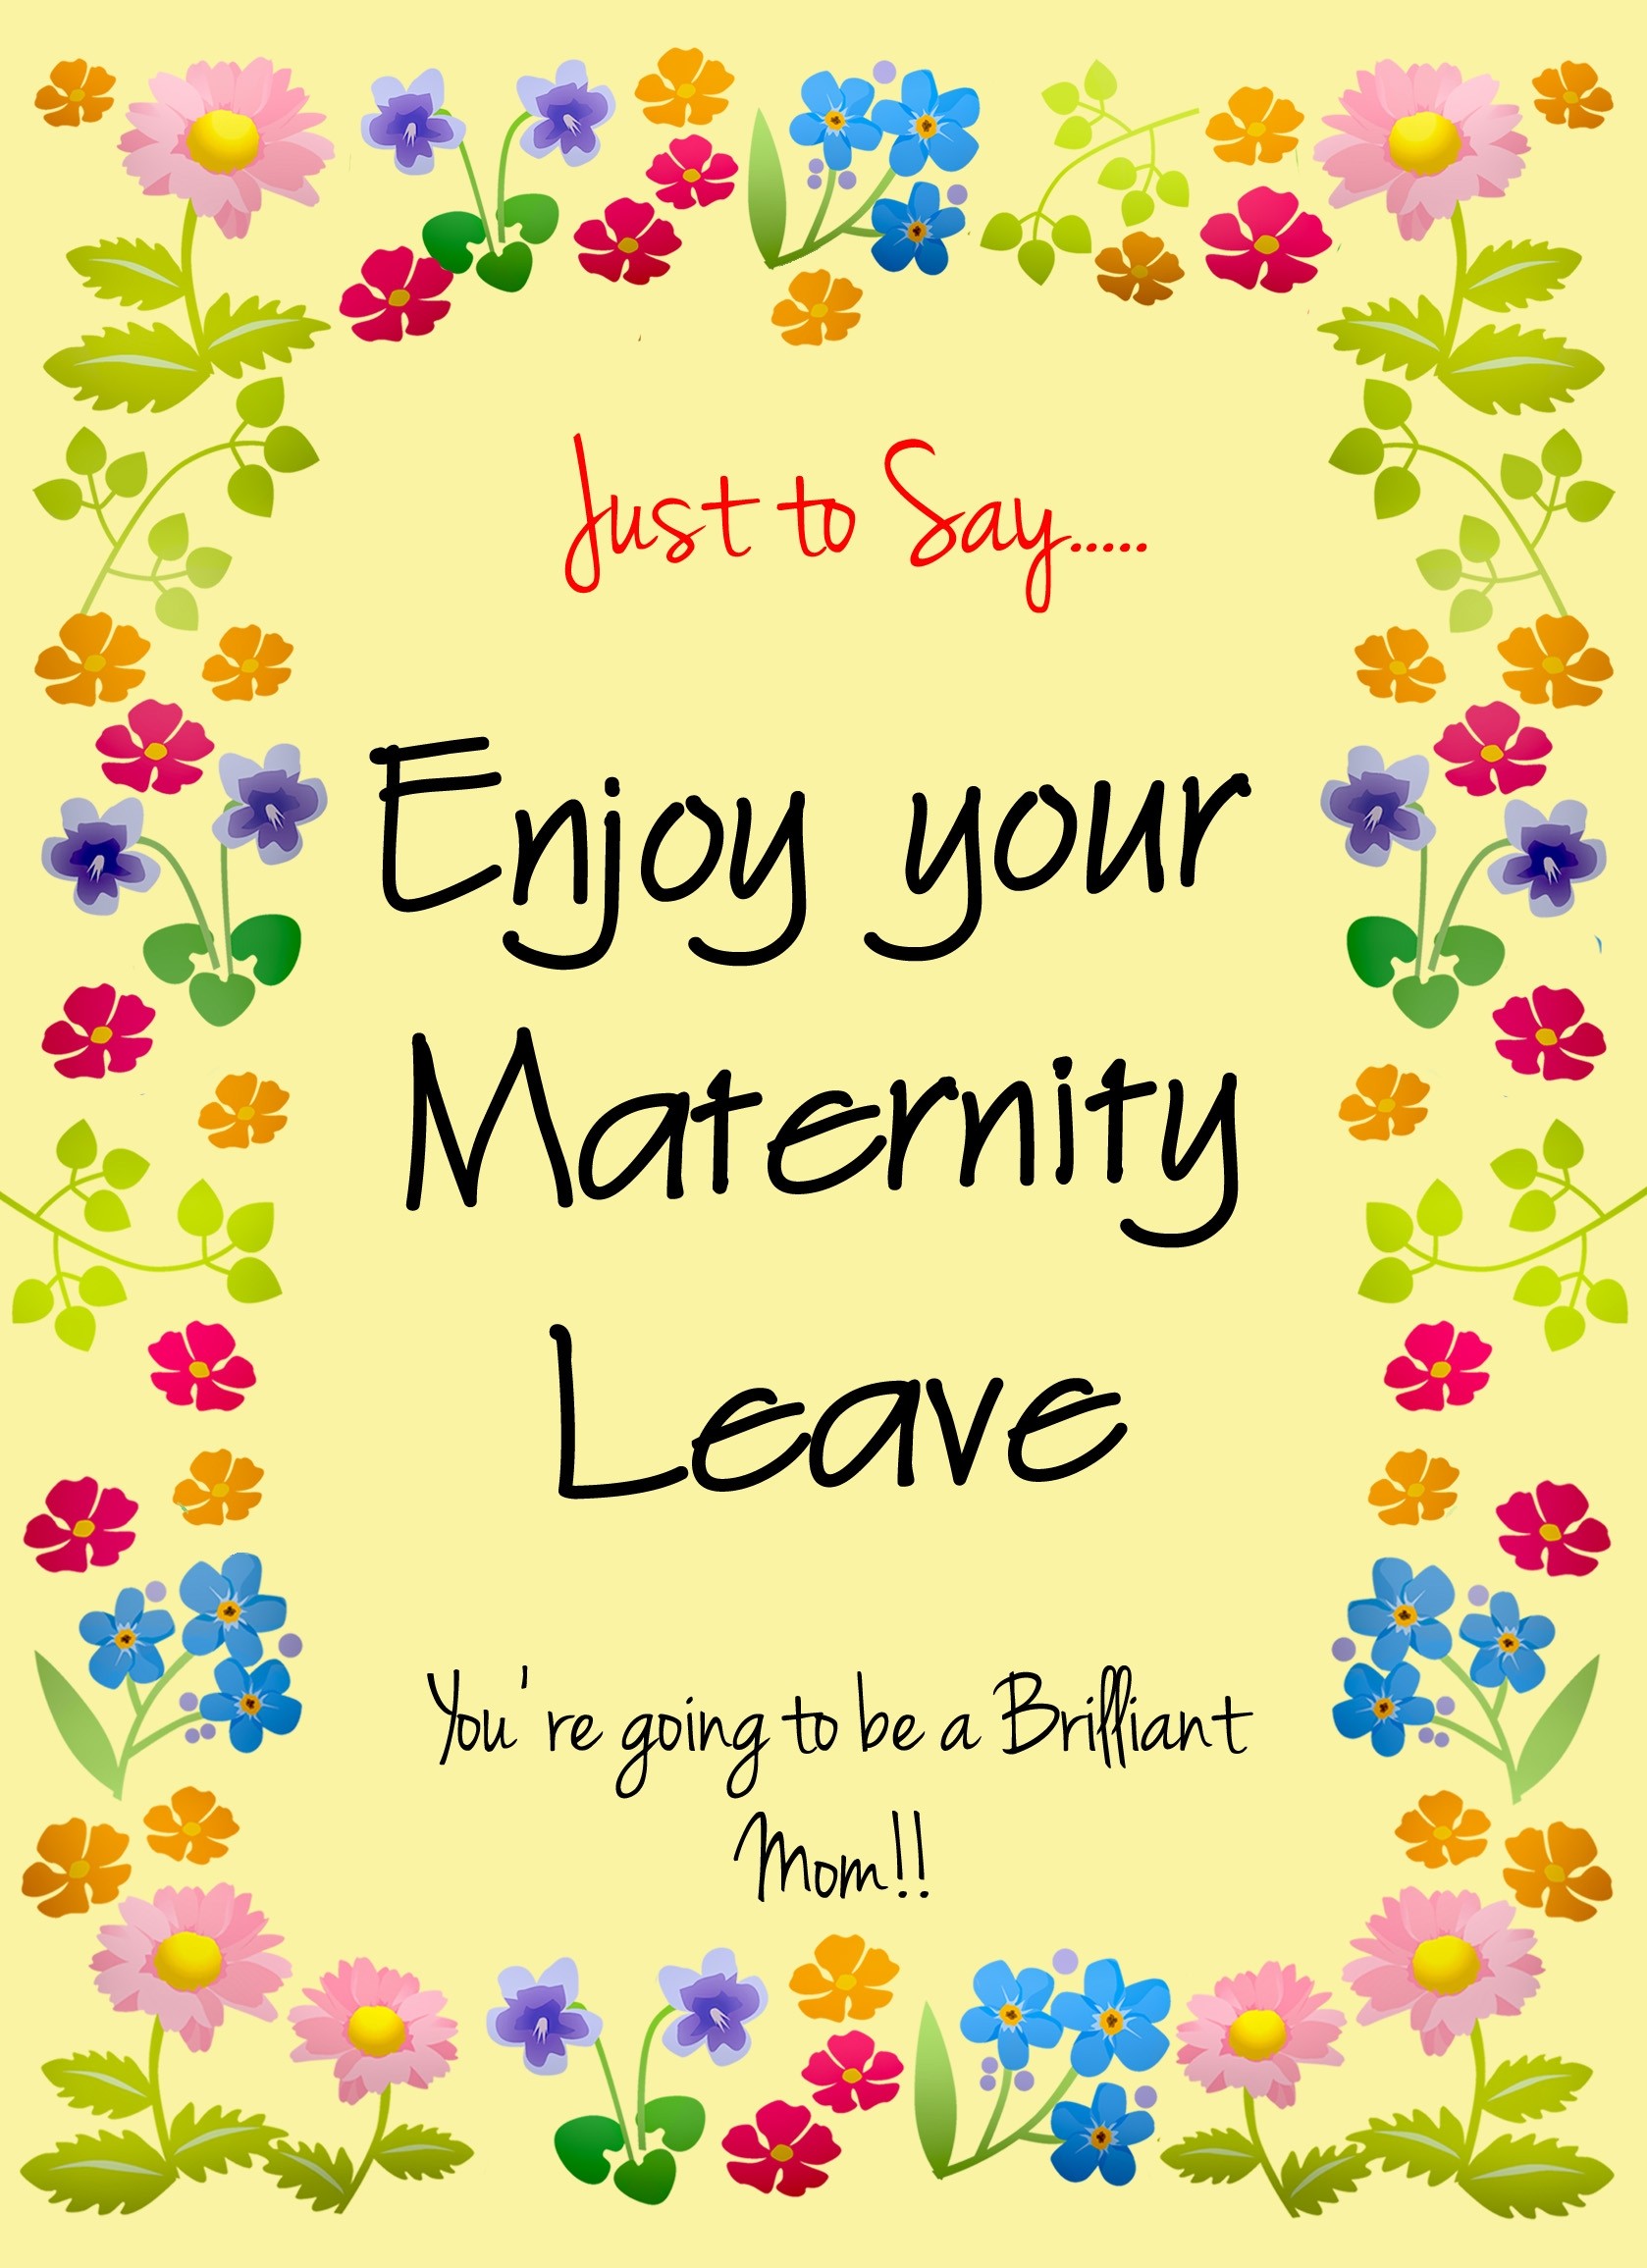 Maternity Leave Baby Pregnancy Expecting Card (Mom)